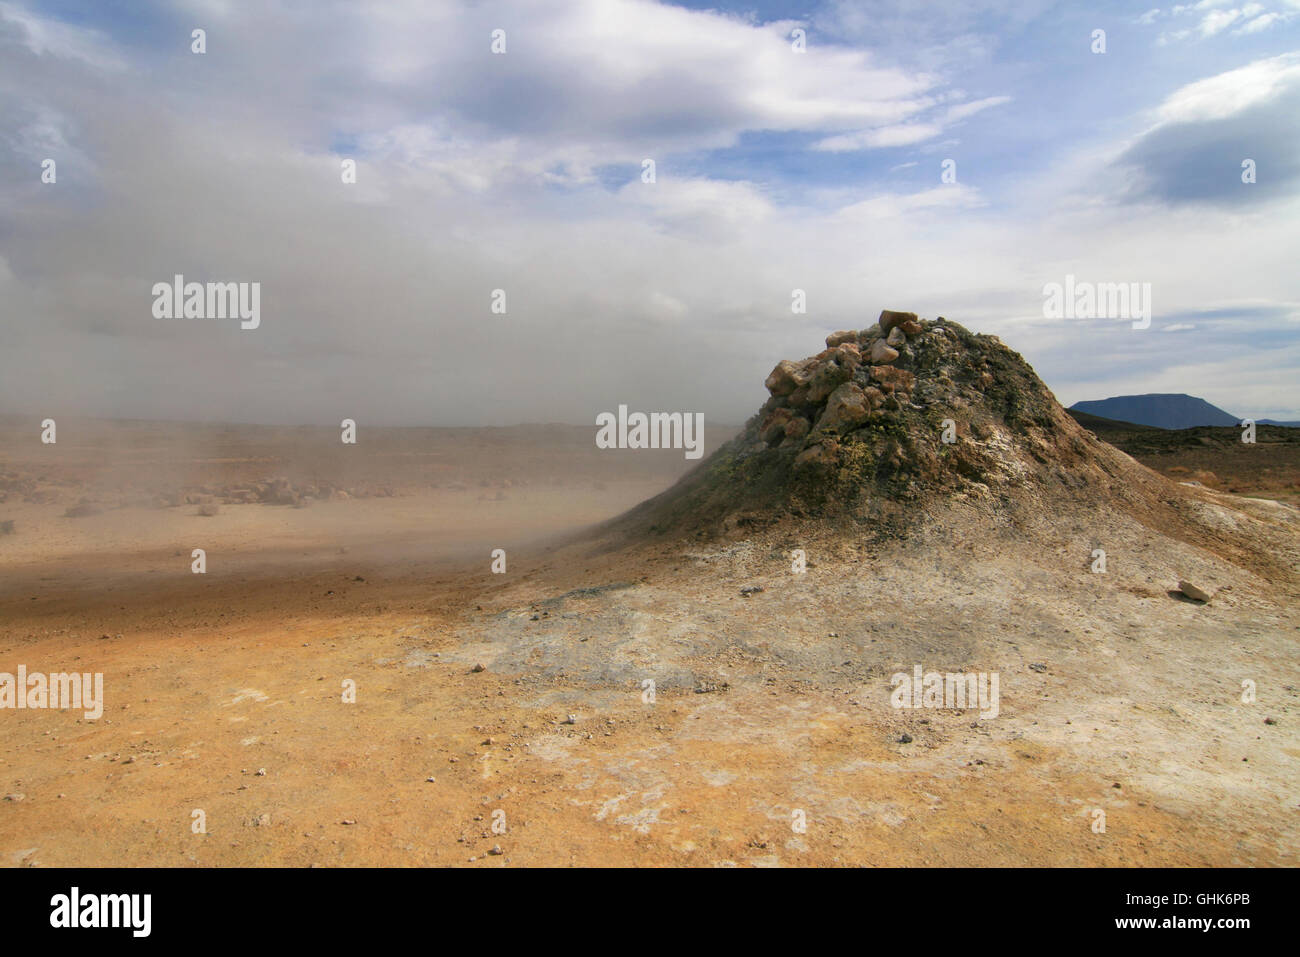 Steaming fumarole in Hverir - Namafjall, between the Myvatn lake and Krafla area, in north Iceland. Stock Photo